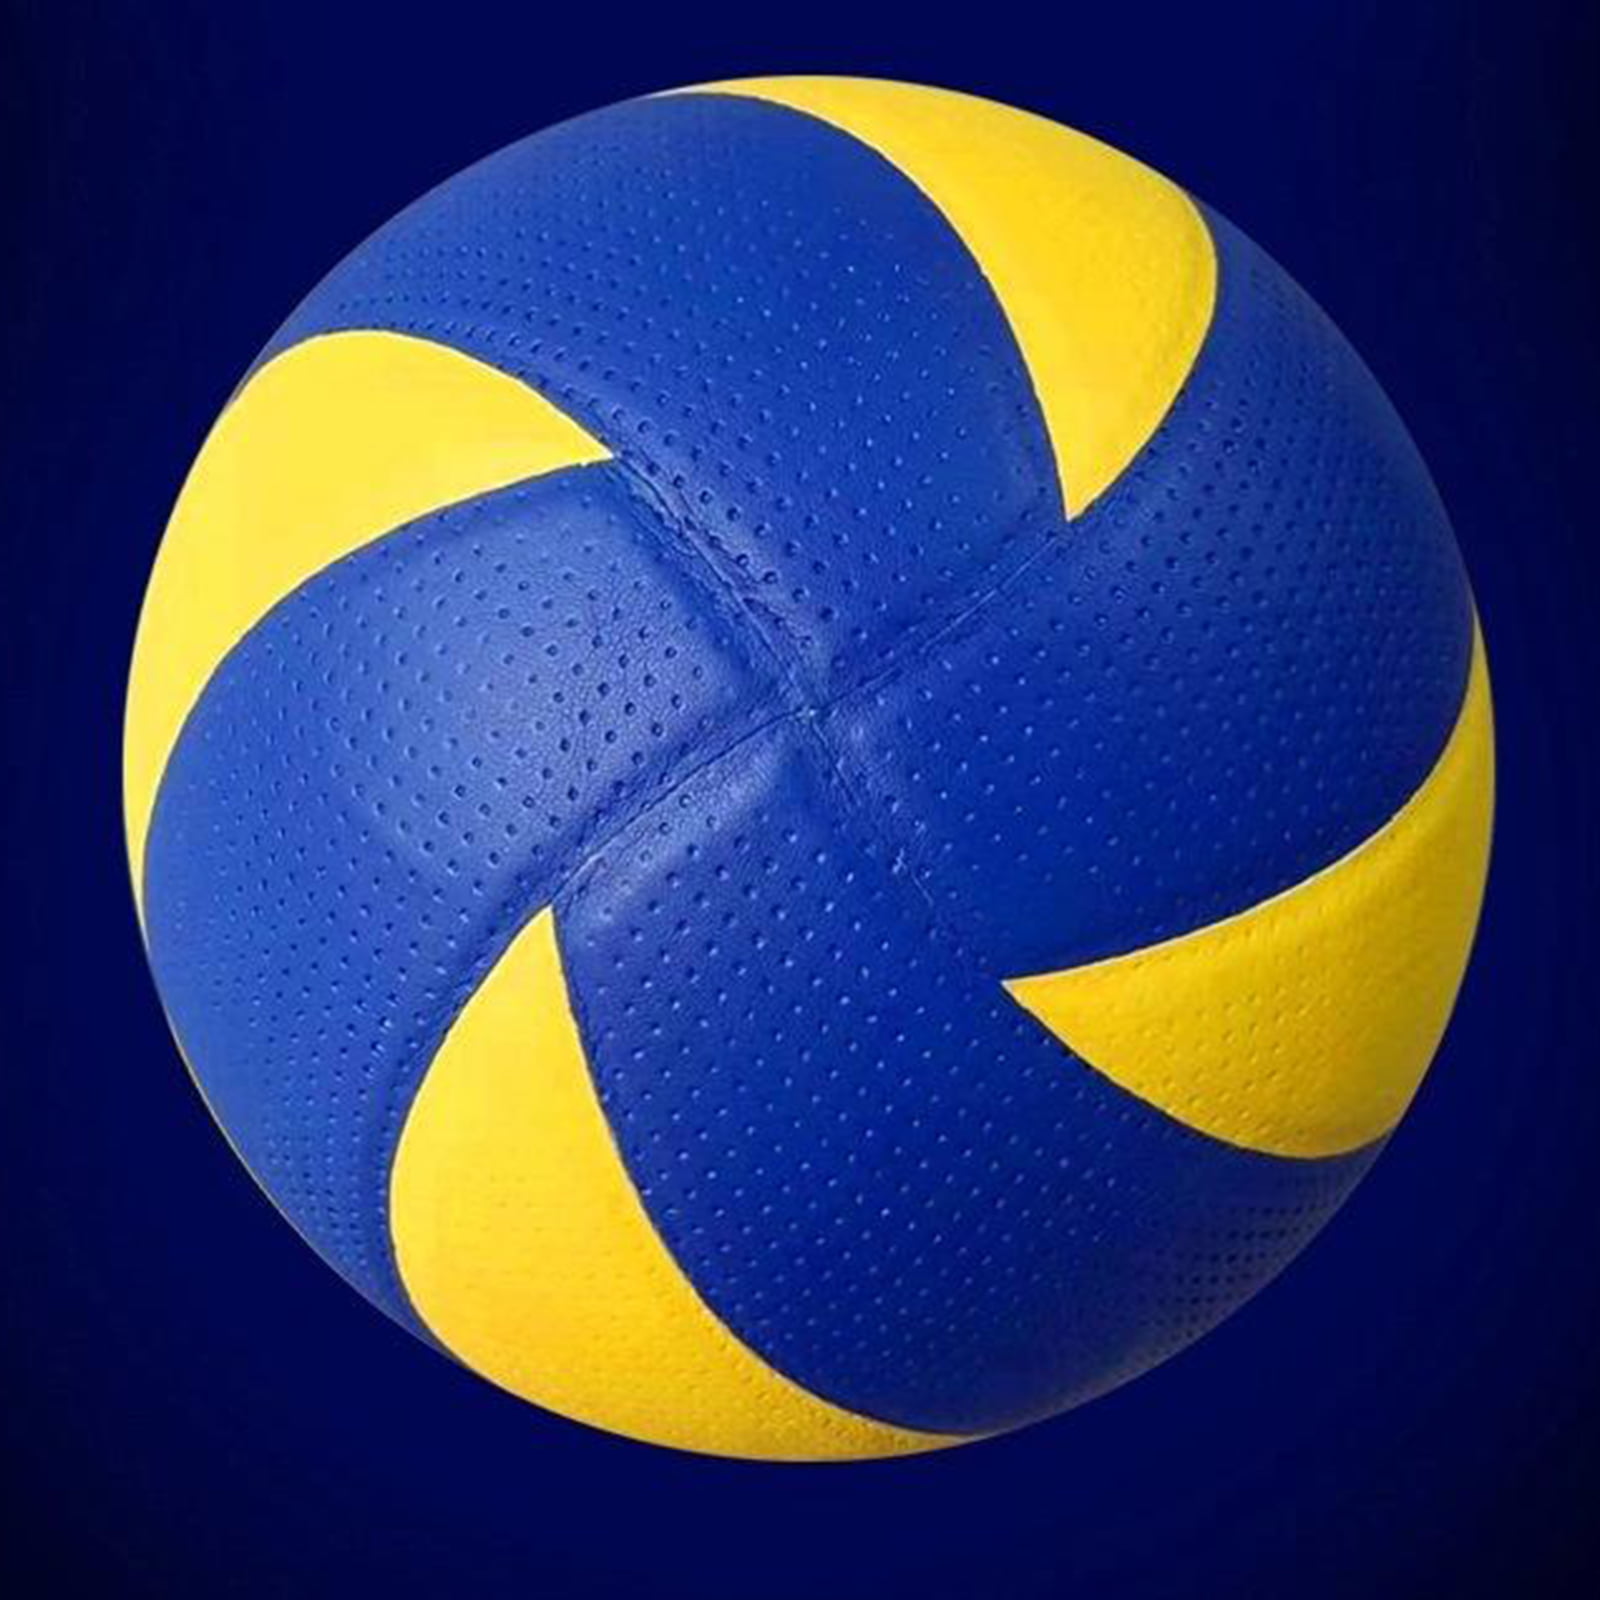 Volleyball Soft Touch Volley Ball Official Size 5 Beach Pool Ball for Games 